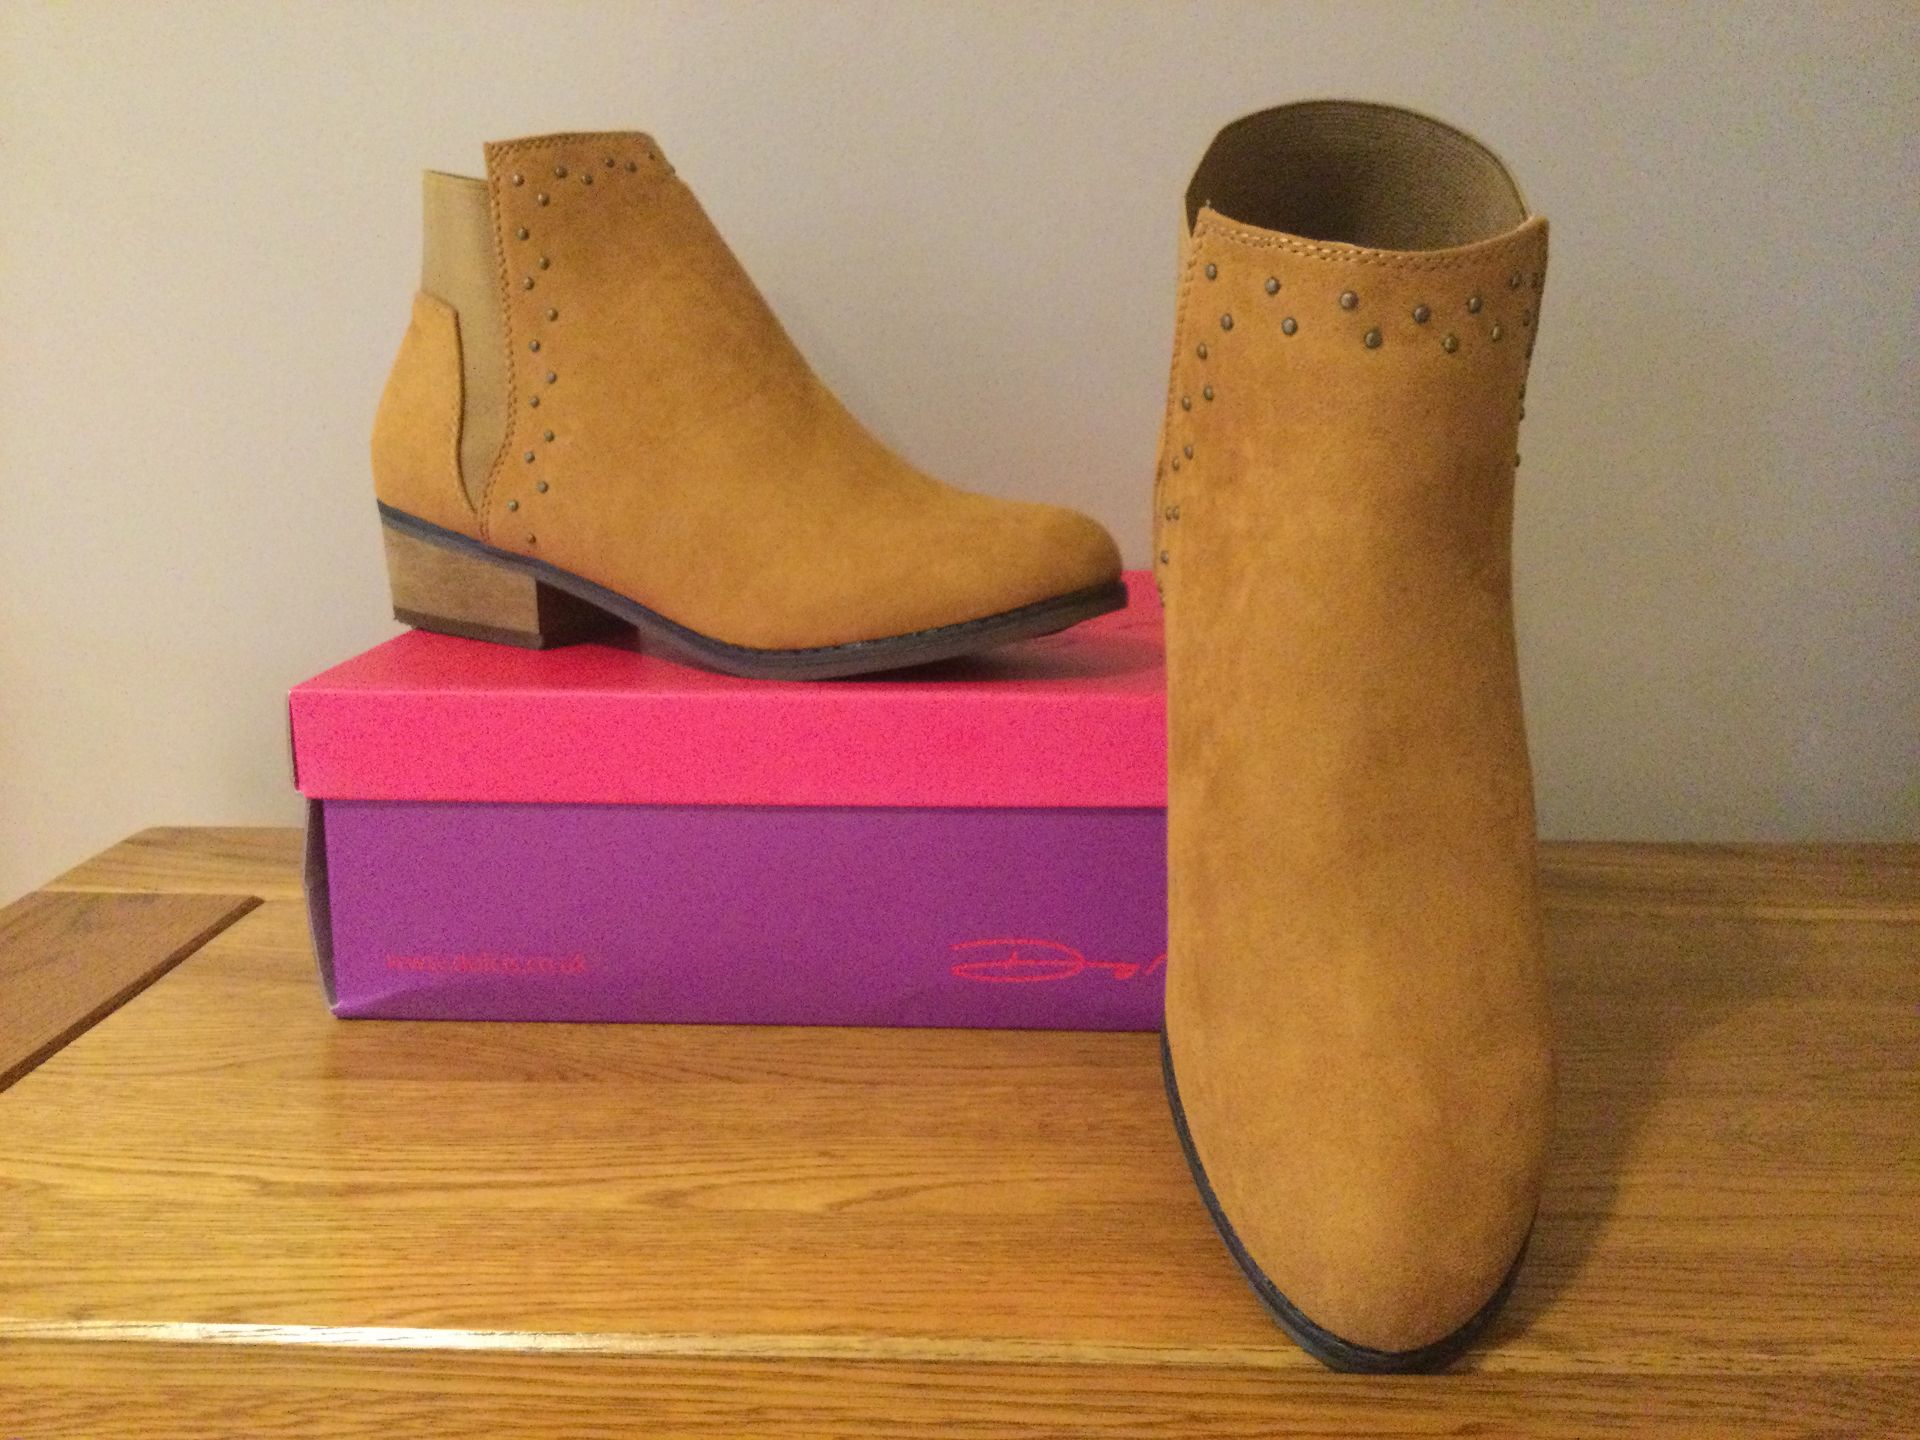 Dolcis “Wendy” Ankle Boots, Size 4, Tan - New RRP £45.00 - Image 2 of 6